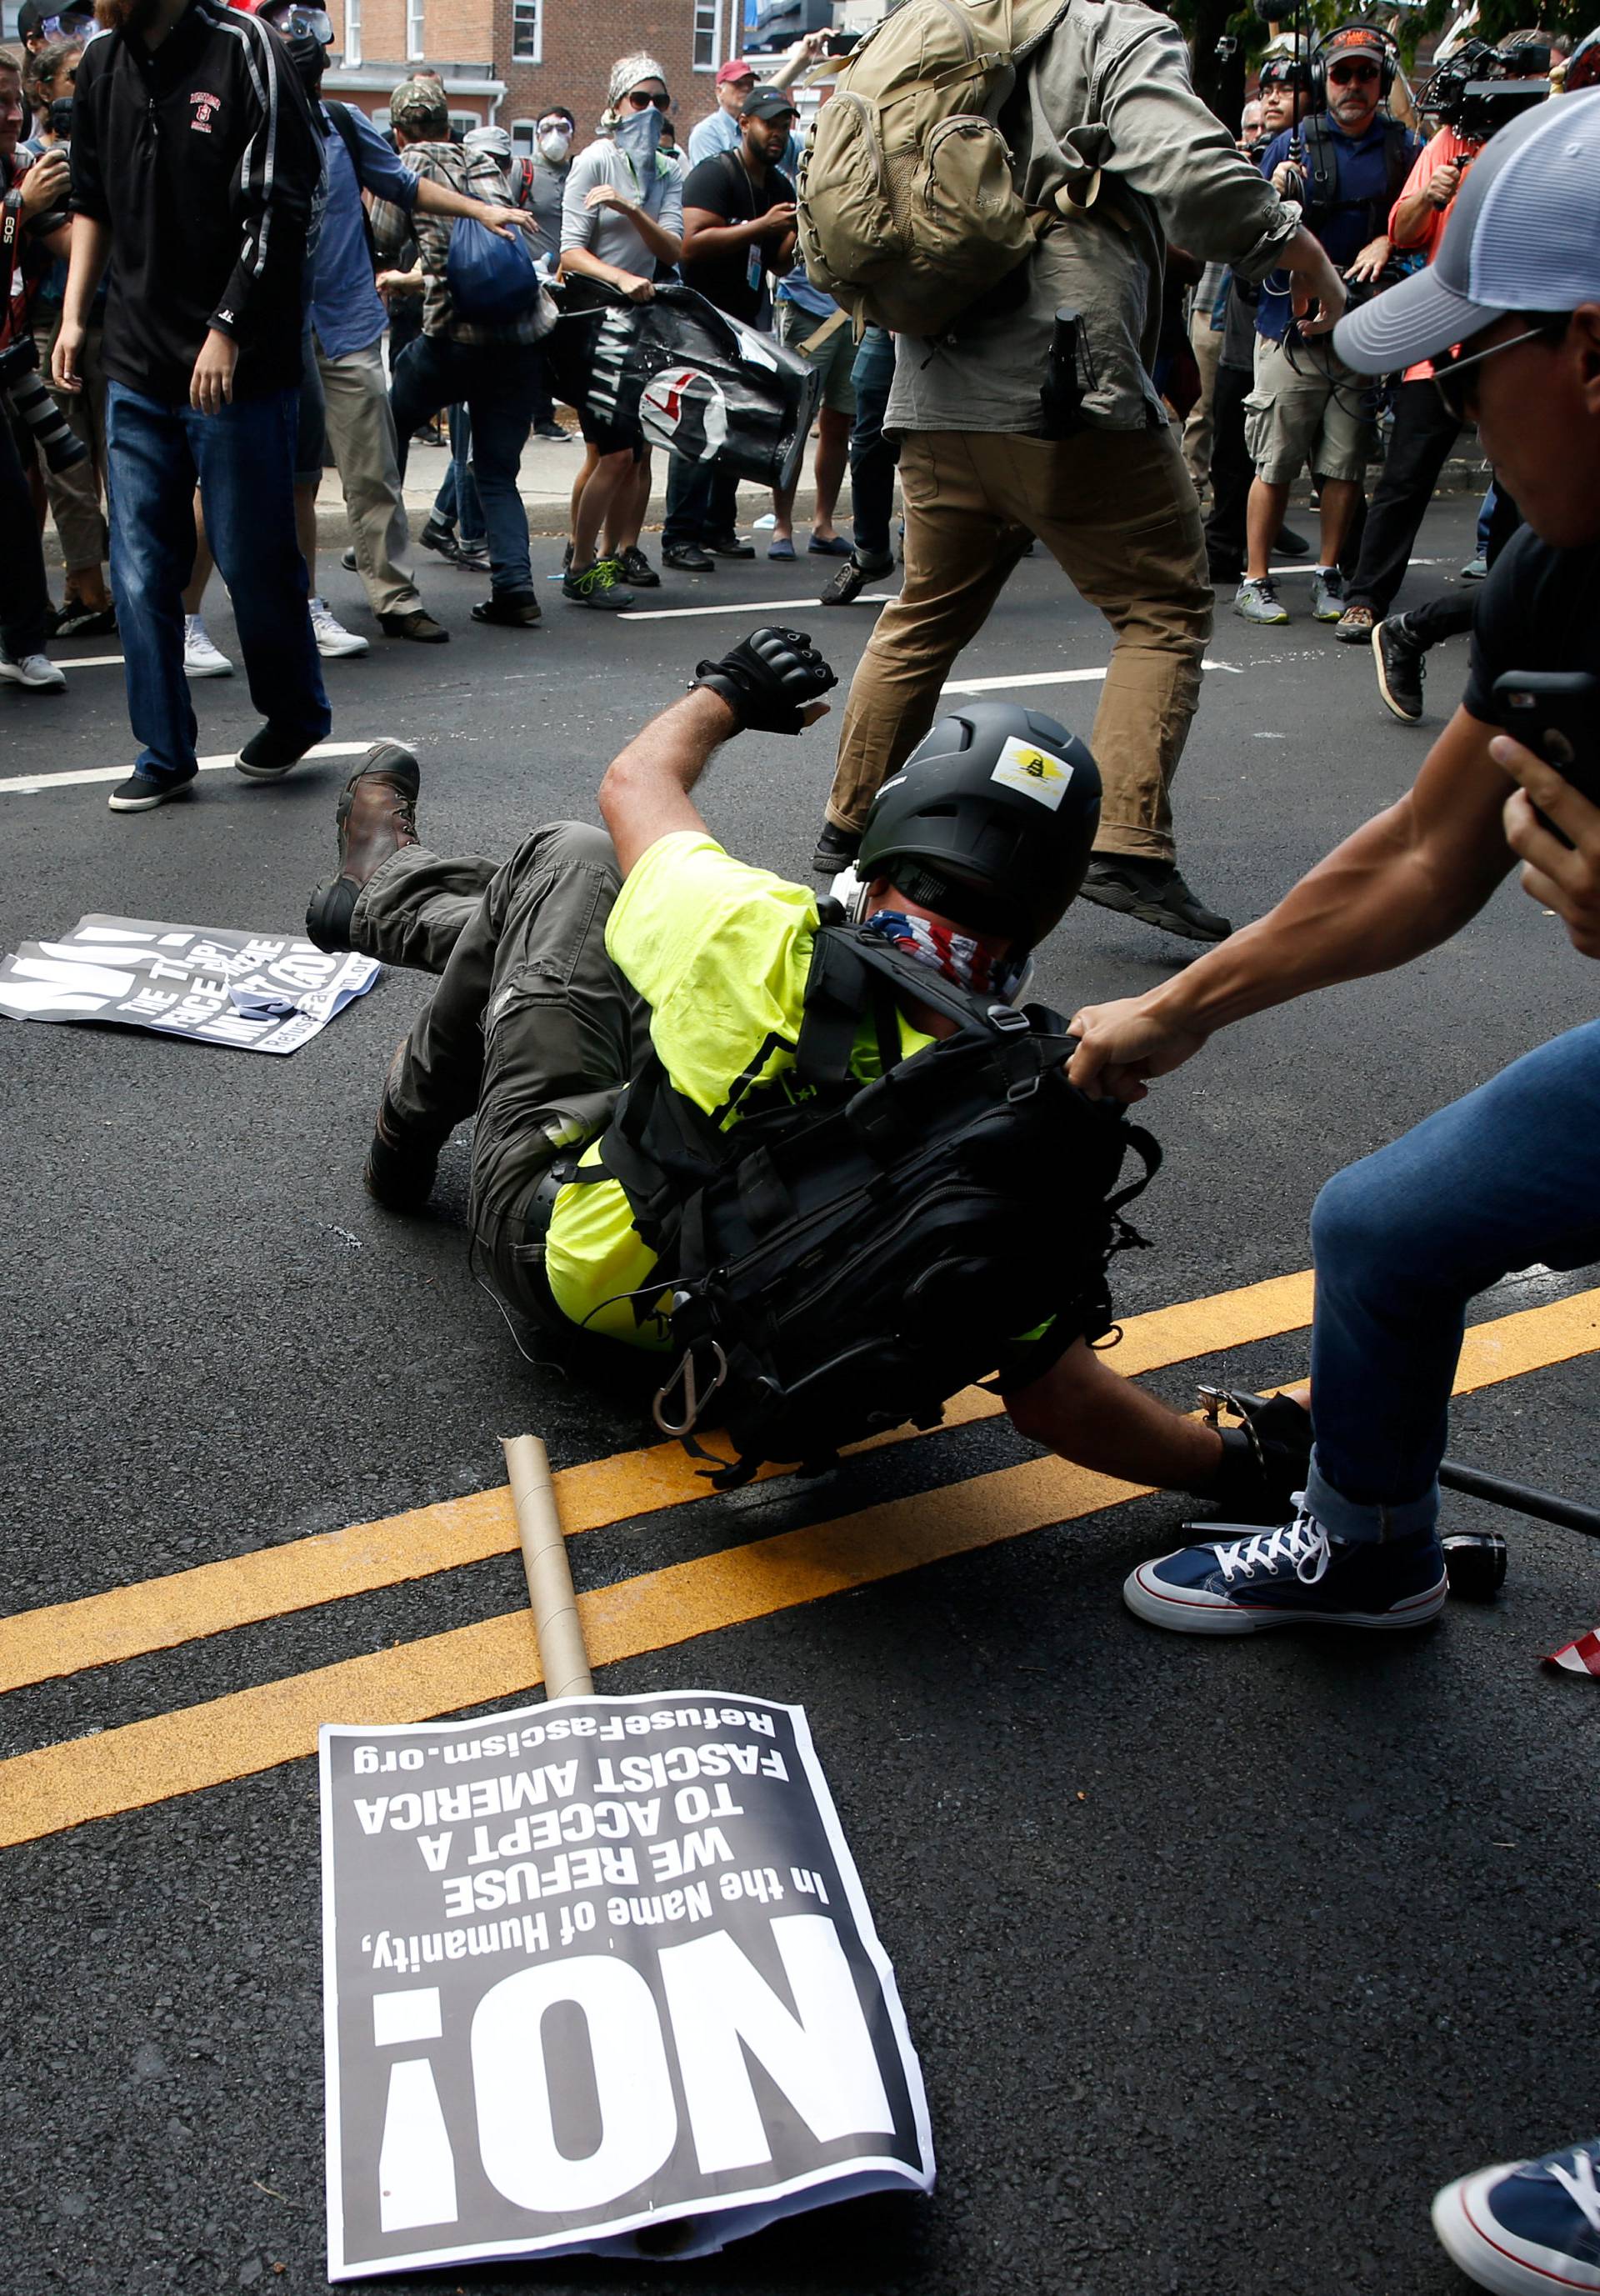 A man is pulled on after falling on the pavement during a clash between members of white nationalist protesters against a group of counter-protesters in Charlottesville